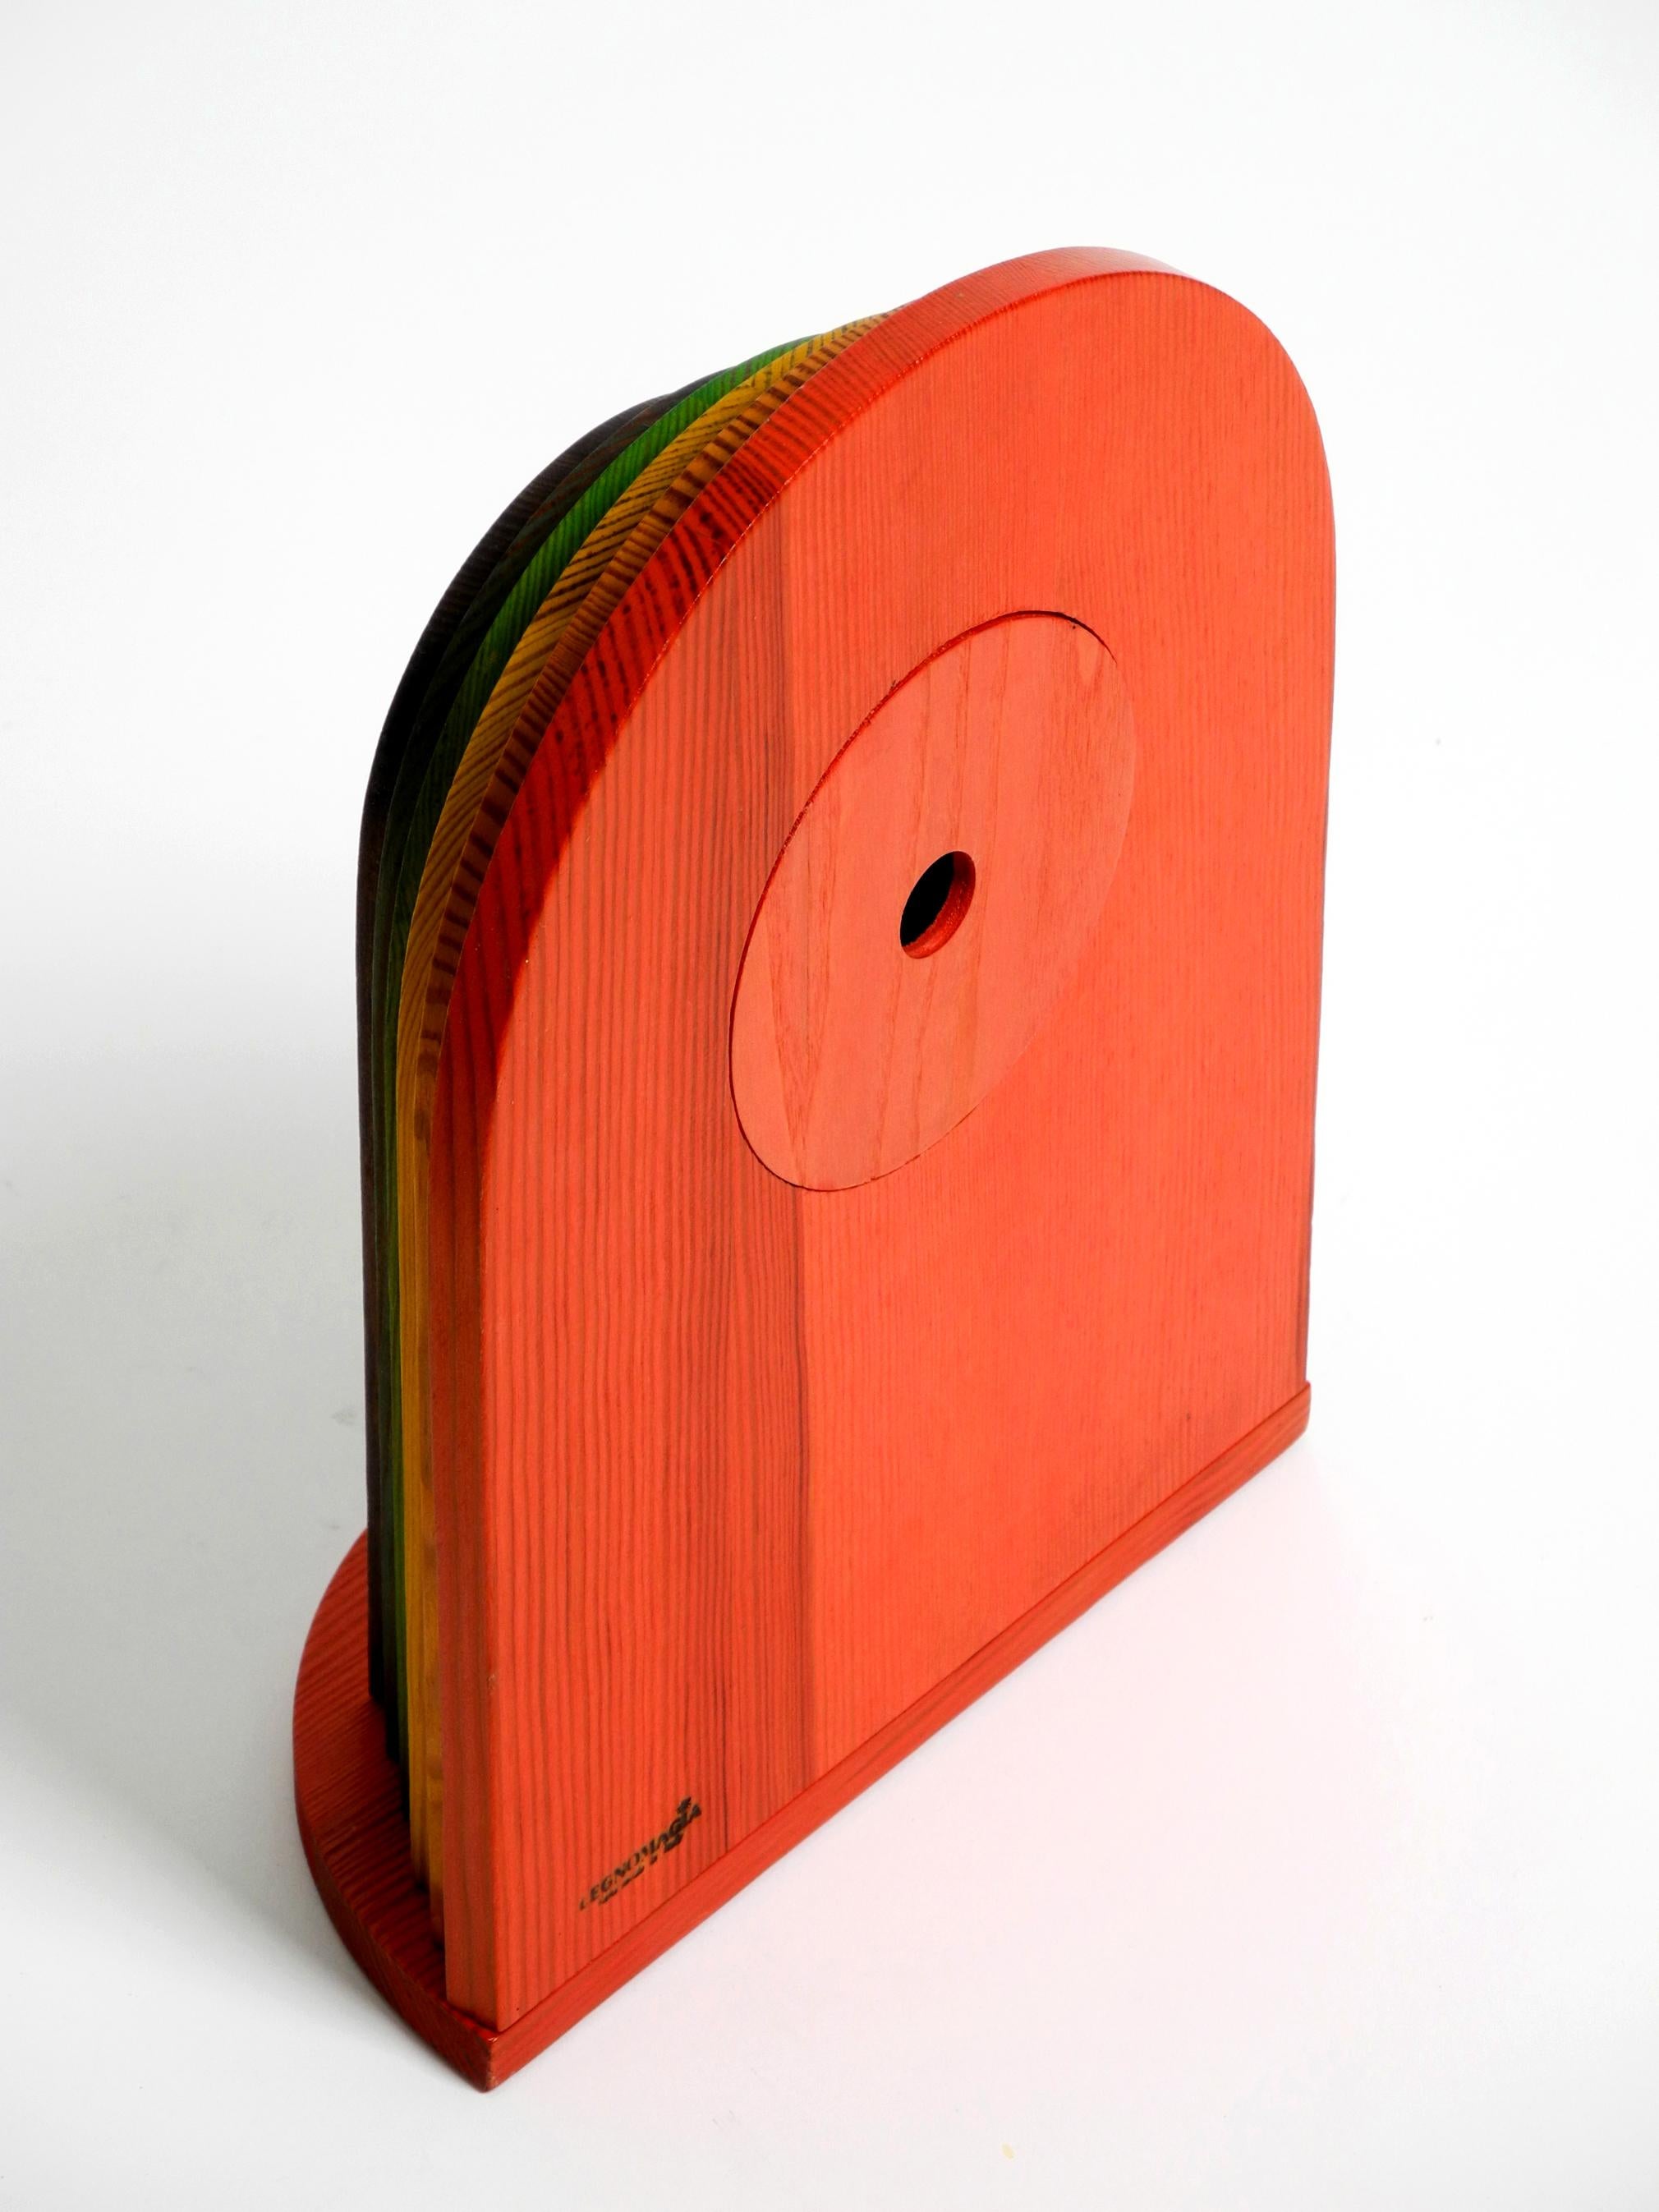 1980s, Colorful Pine Wood Table Clock in Postmodern Design by Legnomagia Italy 8